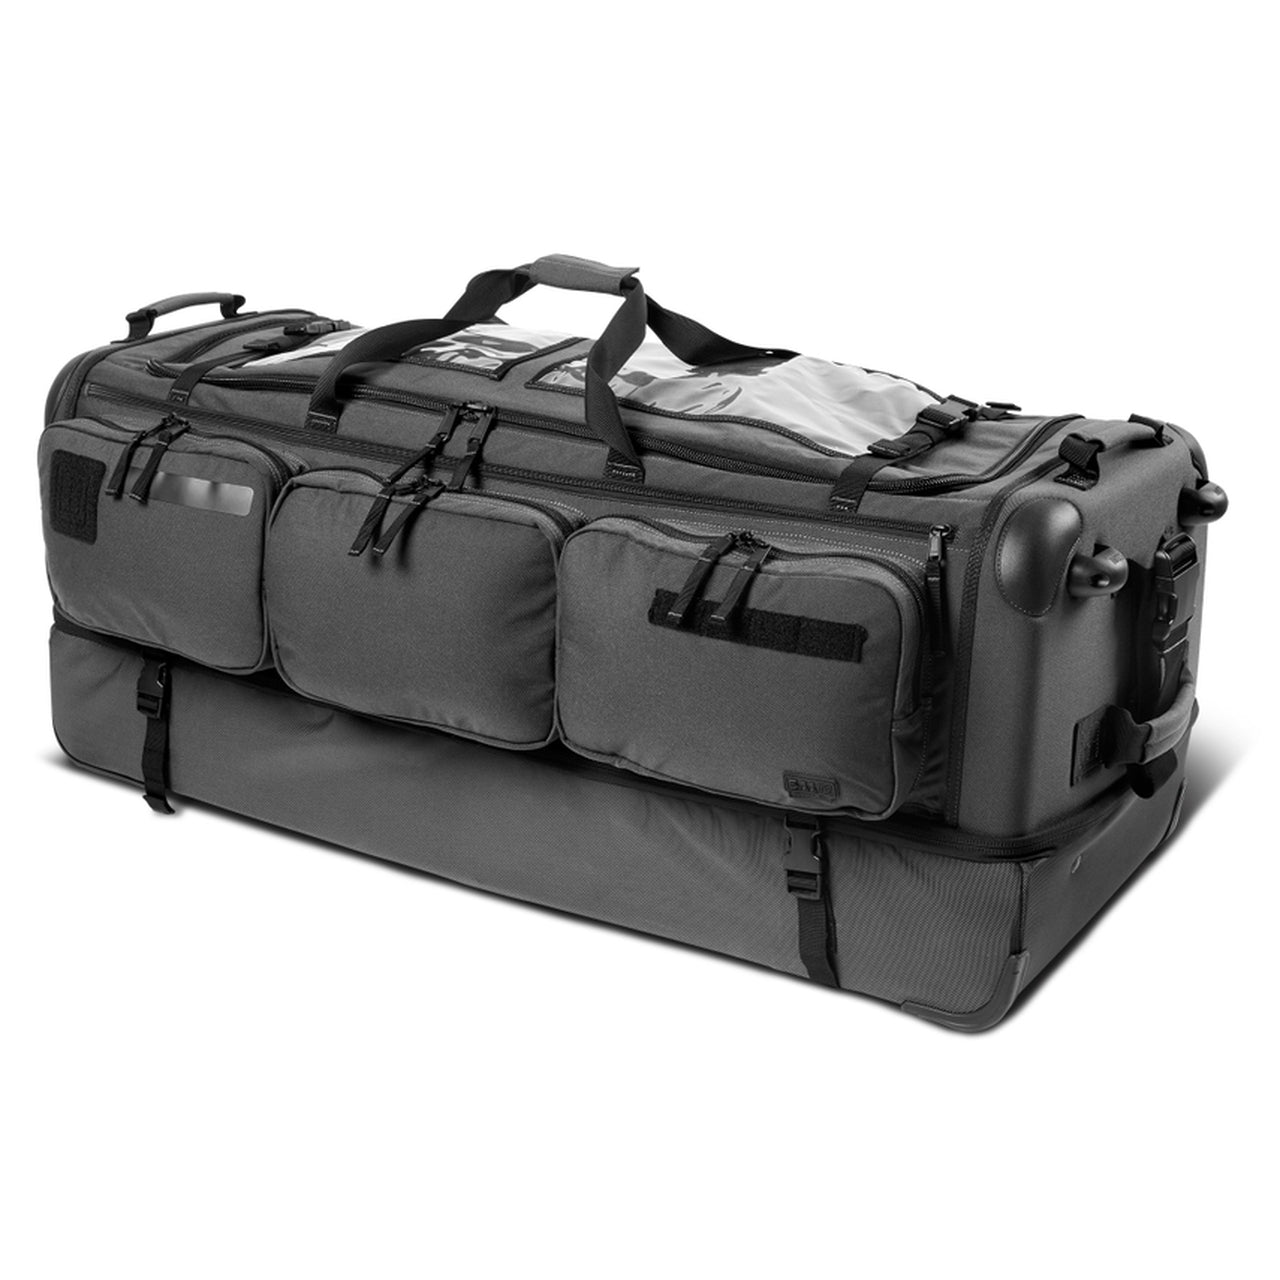 56475 - Cams 3.0 Luggages 186L